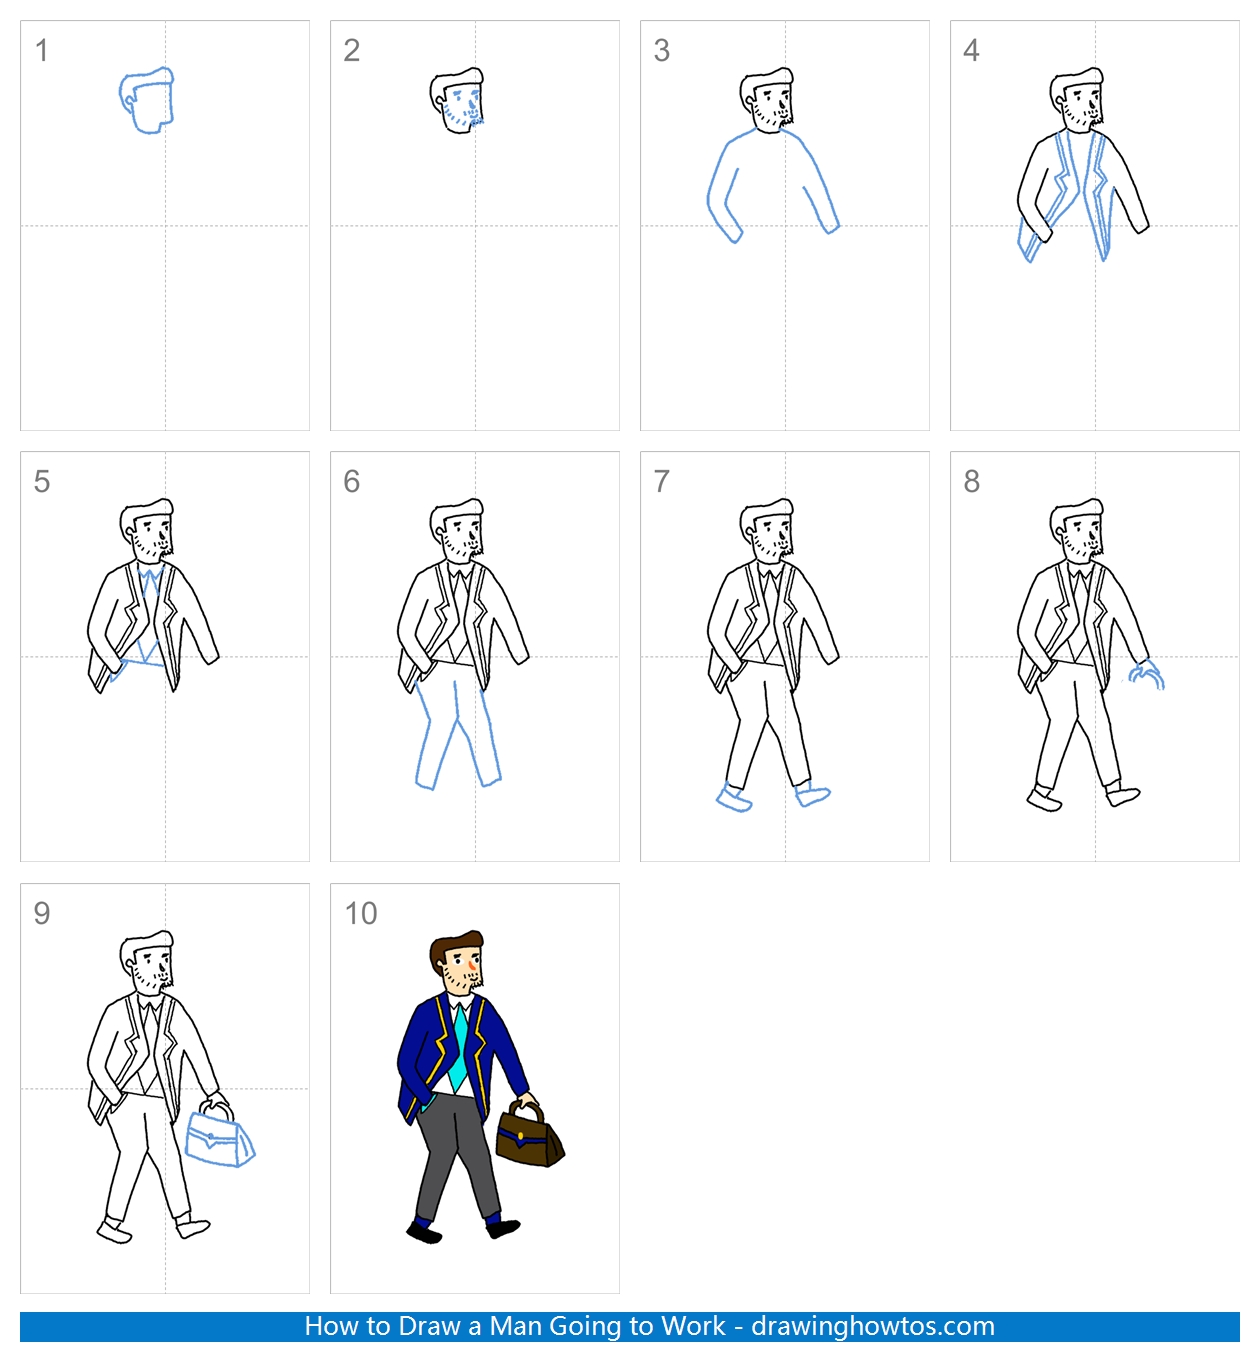 How to Draw a Man Going to Work Step by Step